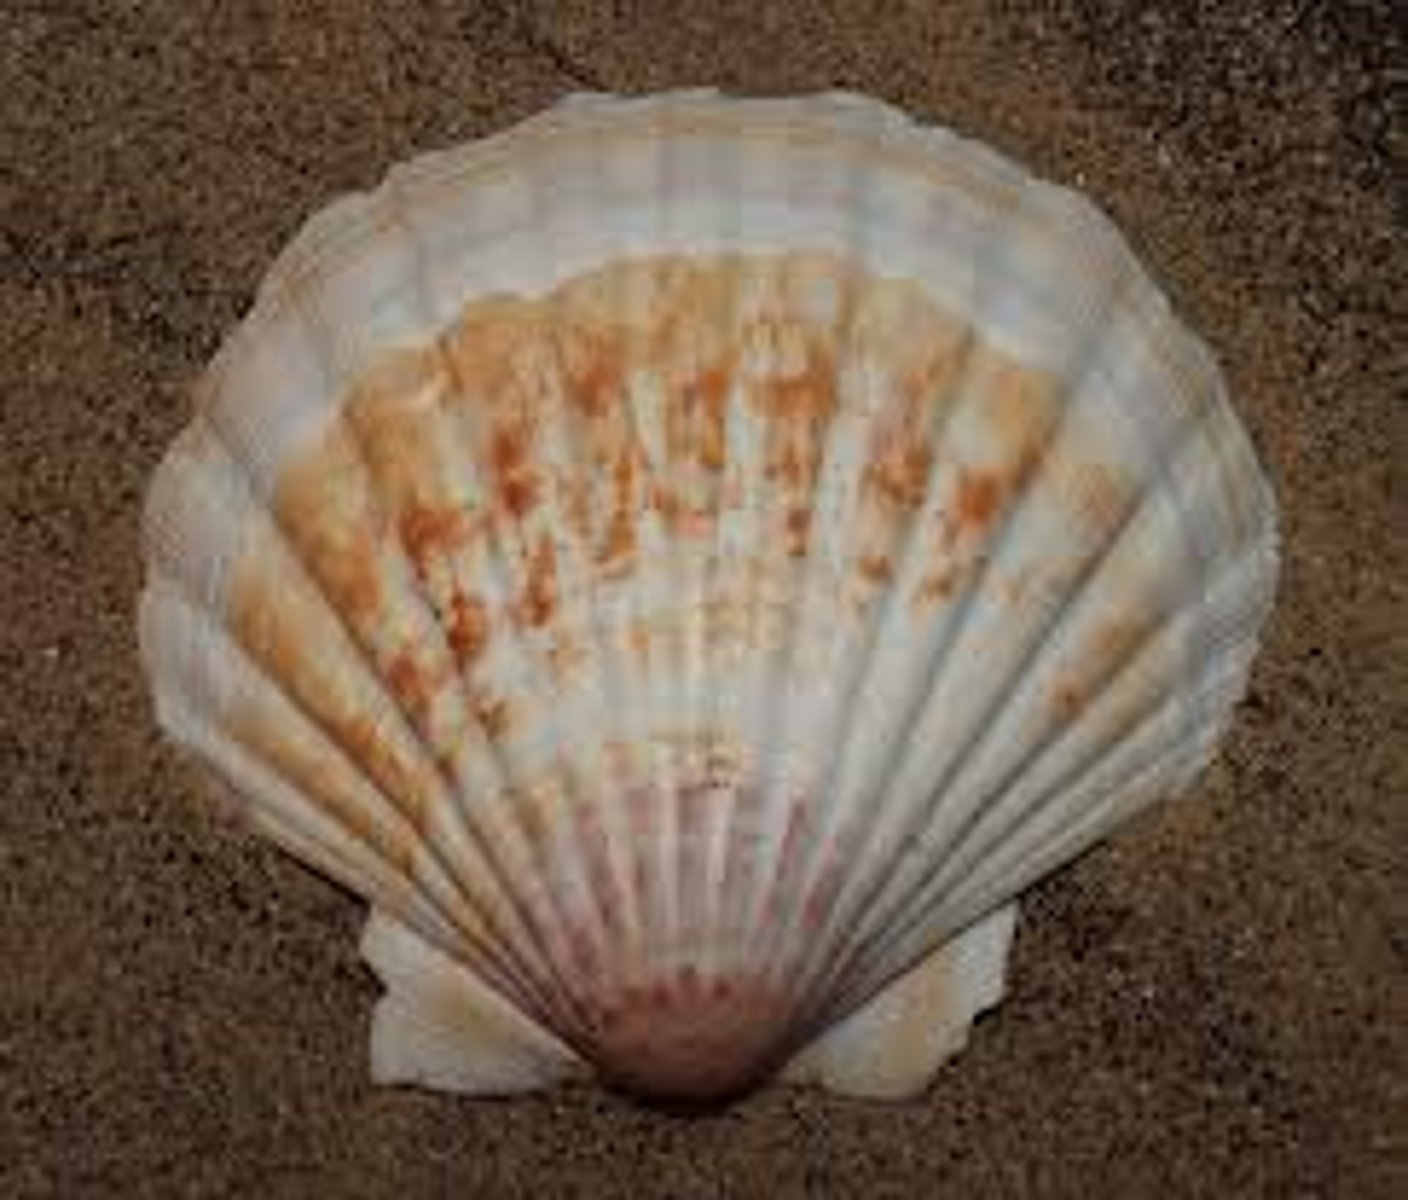 <p>a genus of large scallops or saltwater clams. This genus is known in the fossil record from the Cretaceous period to the Quaternary period. Fossil shells within this genus have been found all over the world</p><p>Phylum Mollusca; Class Bivalvia</p>